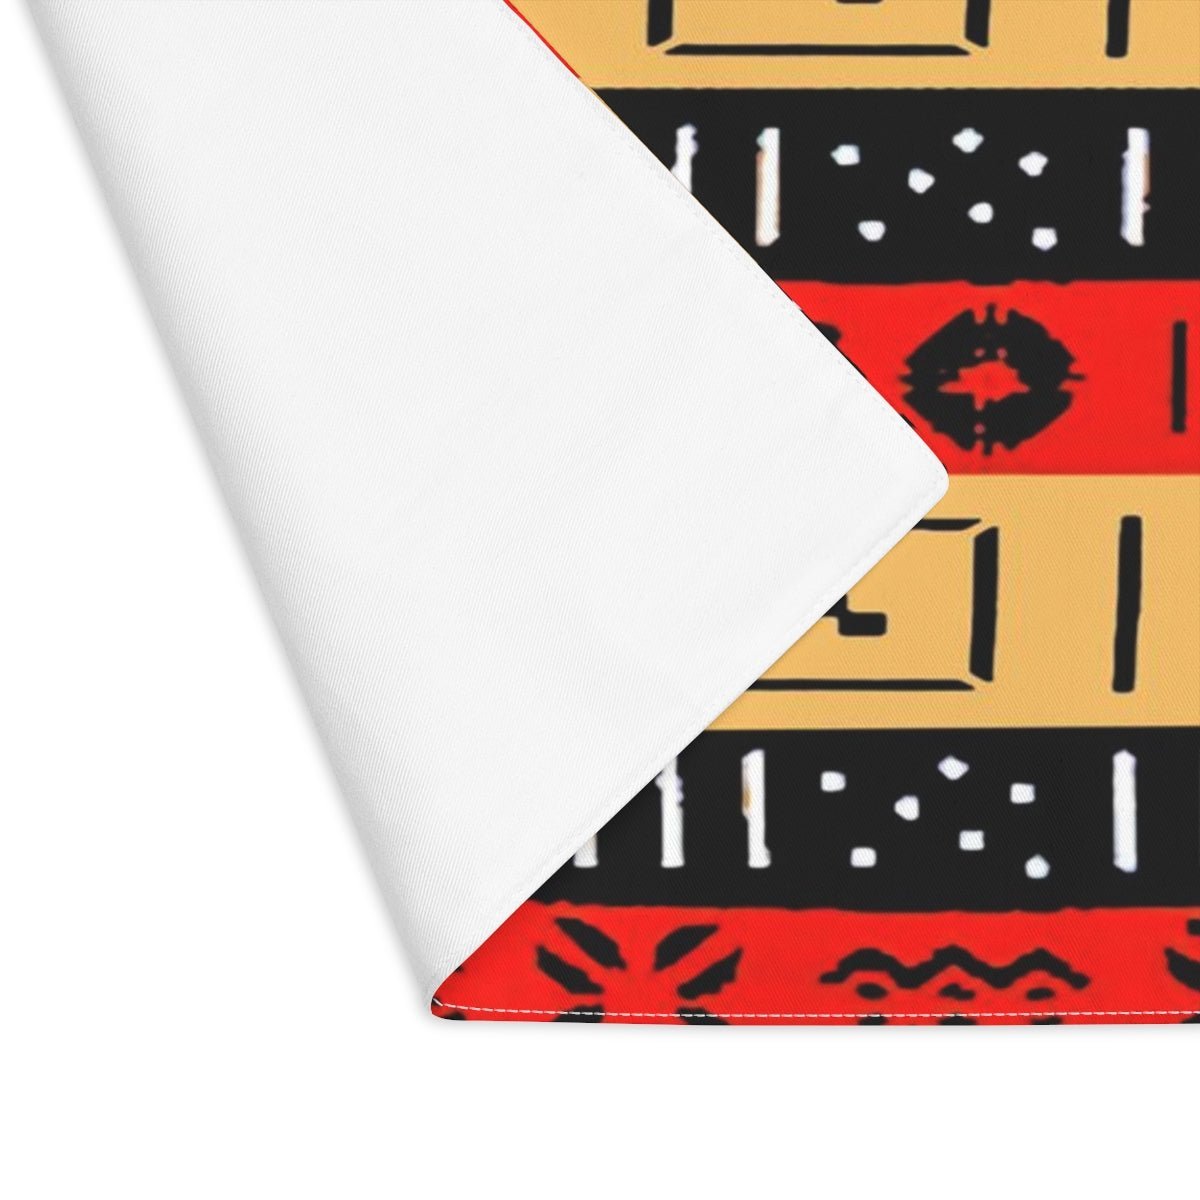 African Placemat Mudcloth Print - Bynelo